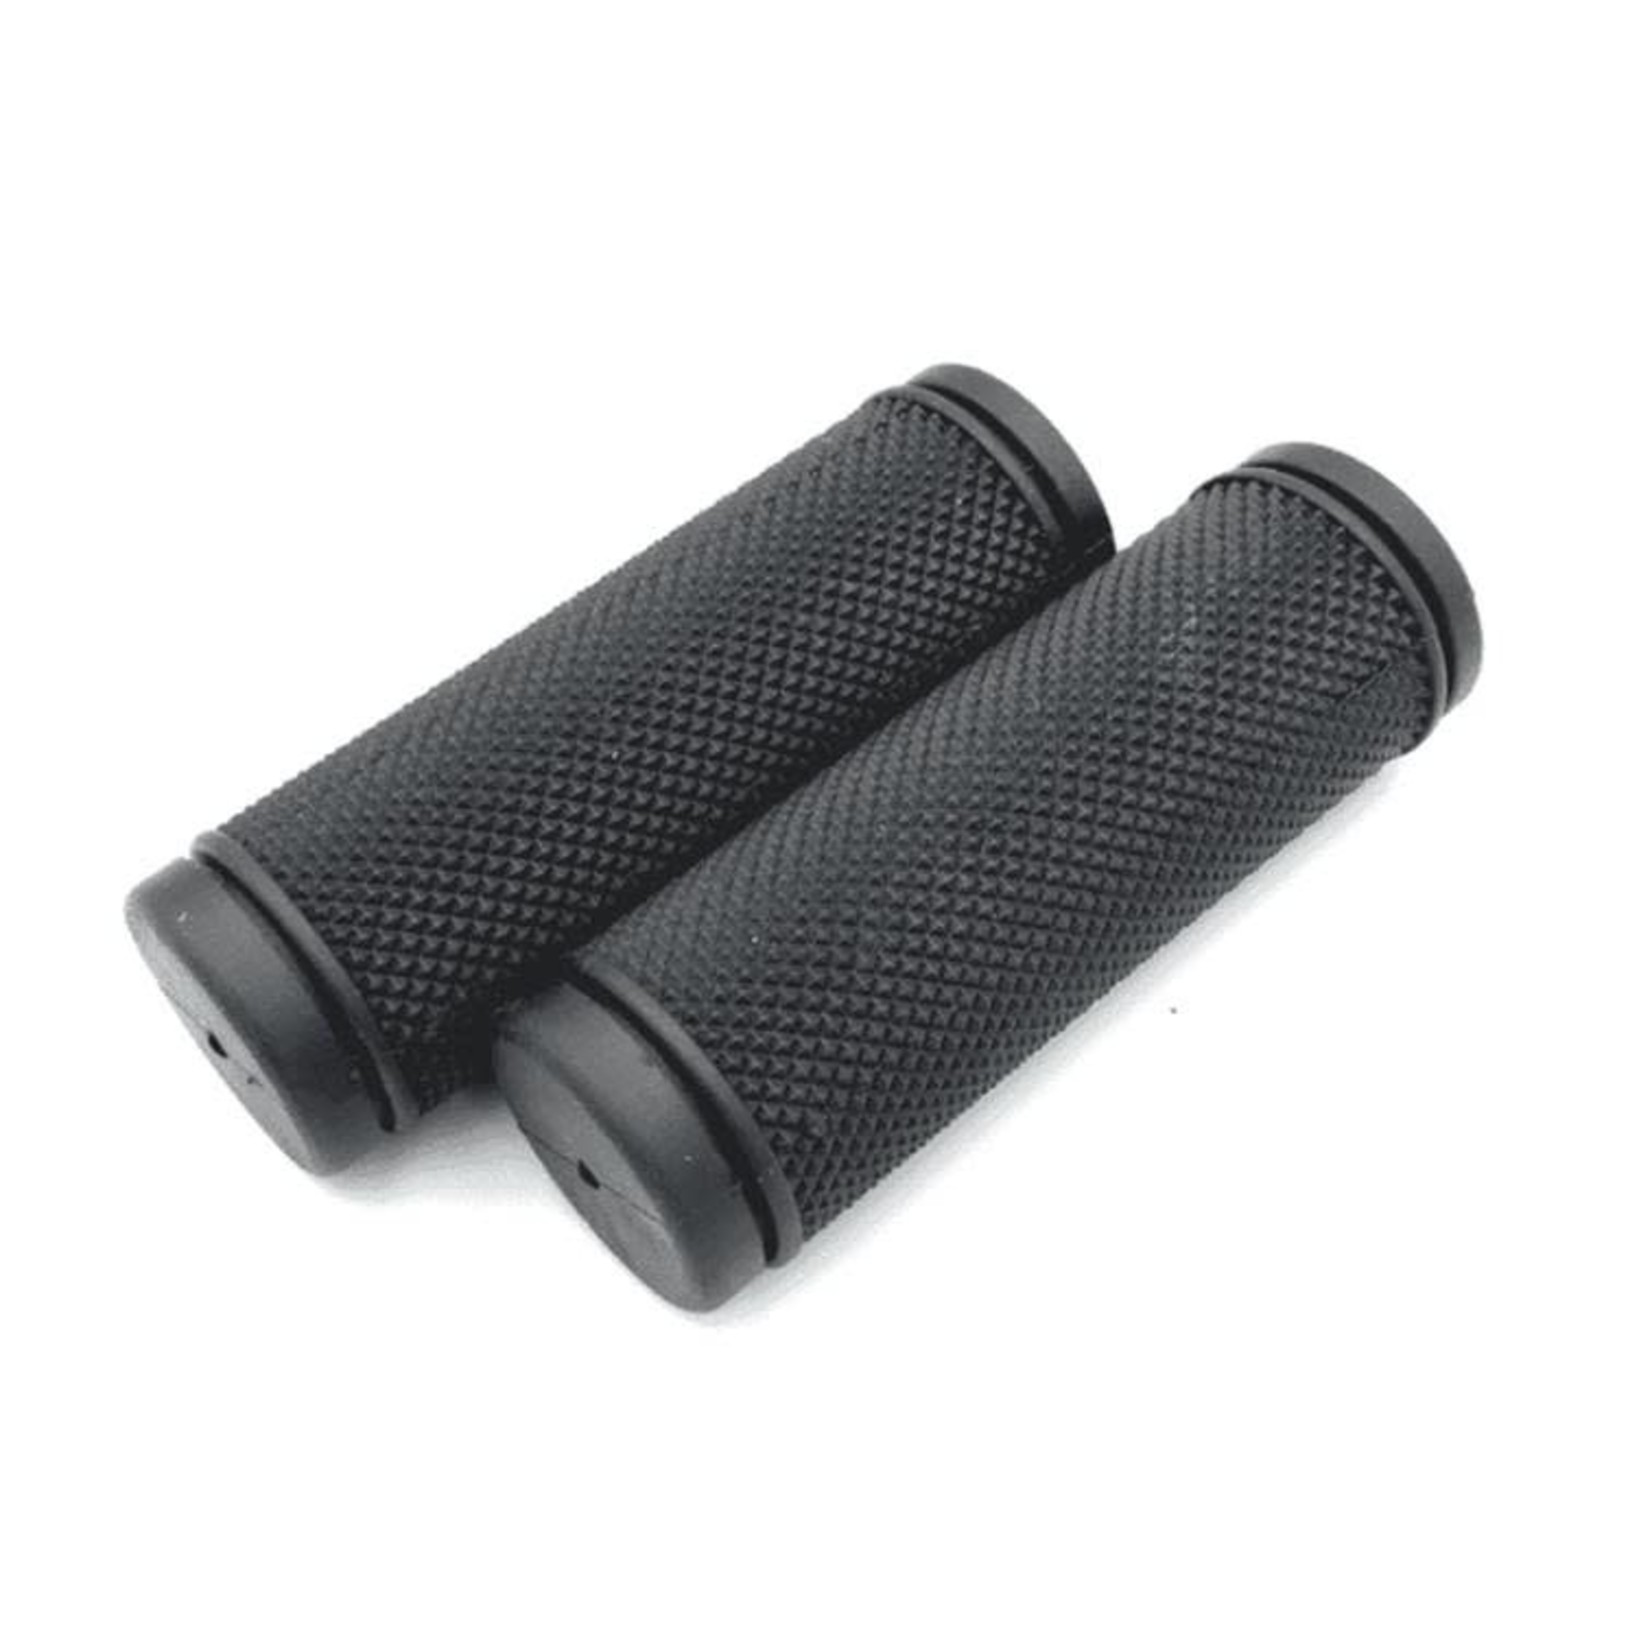 Syncros Closed End Grip Shift Grips SG-09